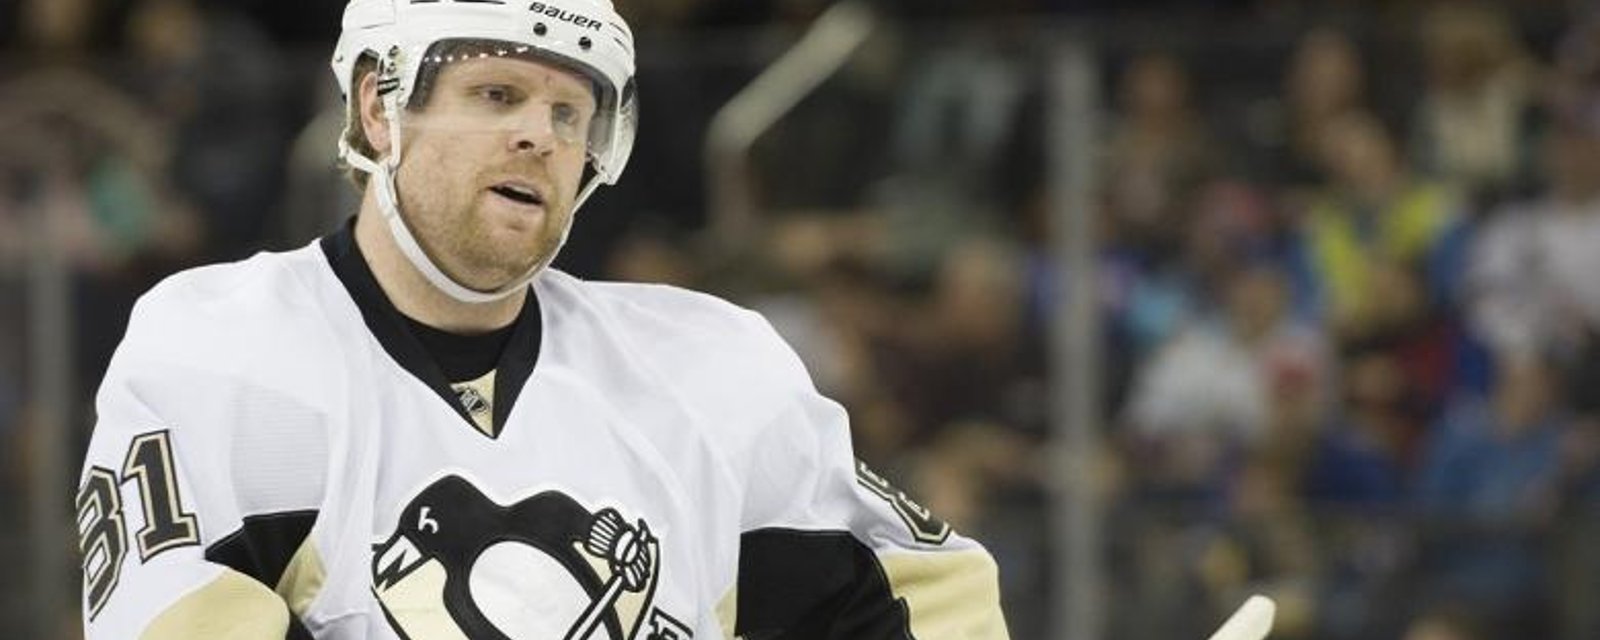 Phil Kessel gives surprising answer when asked if he will bring the Cup to Toronto.